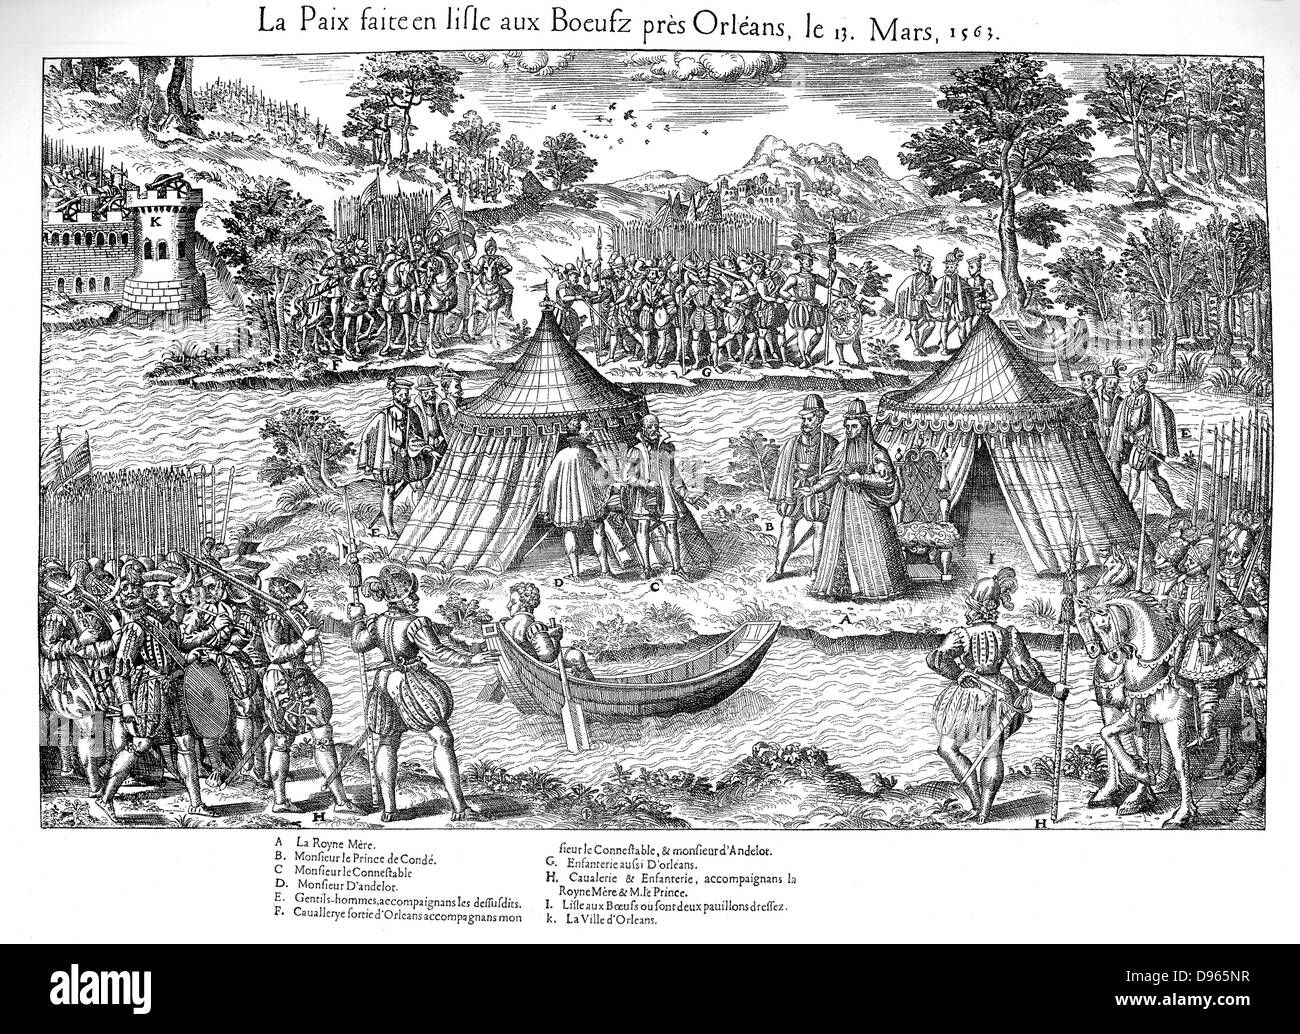 French Religious Wars 1562-1968. The Peace of Amboise, 12 March 1563, which ended the first religious war, held on the Isle de Boeuf, Orleans. Catherine de Medici (1519-1589), A. Louis, Prince de Conde (1530-1569) leader of the Huguenots, B. Constable Anne de Montmorency, Constable of France (1493-1767), C. Francois de Coligny, seigneur d'Andelot (1521-1569), Huguenot commander, D. Engraving by Jacques Tortorel (fl1568-1590) and Jean-Jacques Perrissin (c1536-1617) from their series on the Huguenot Wars, c1570. Stock Photo